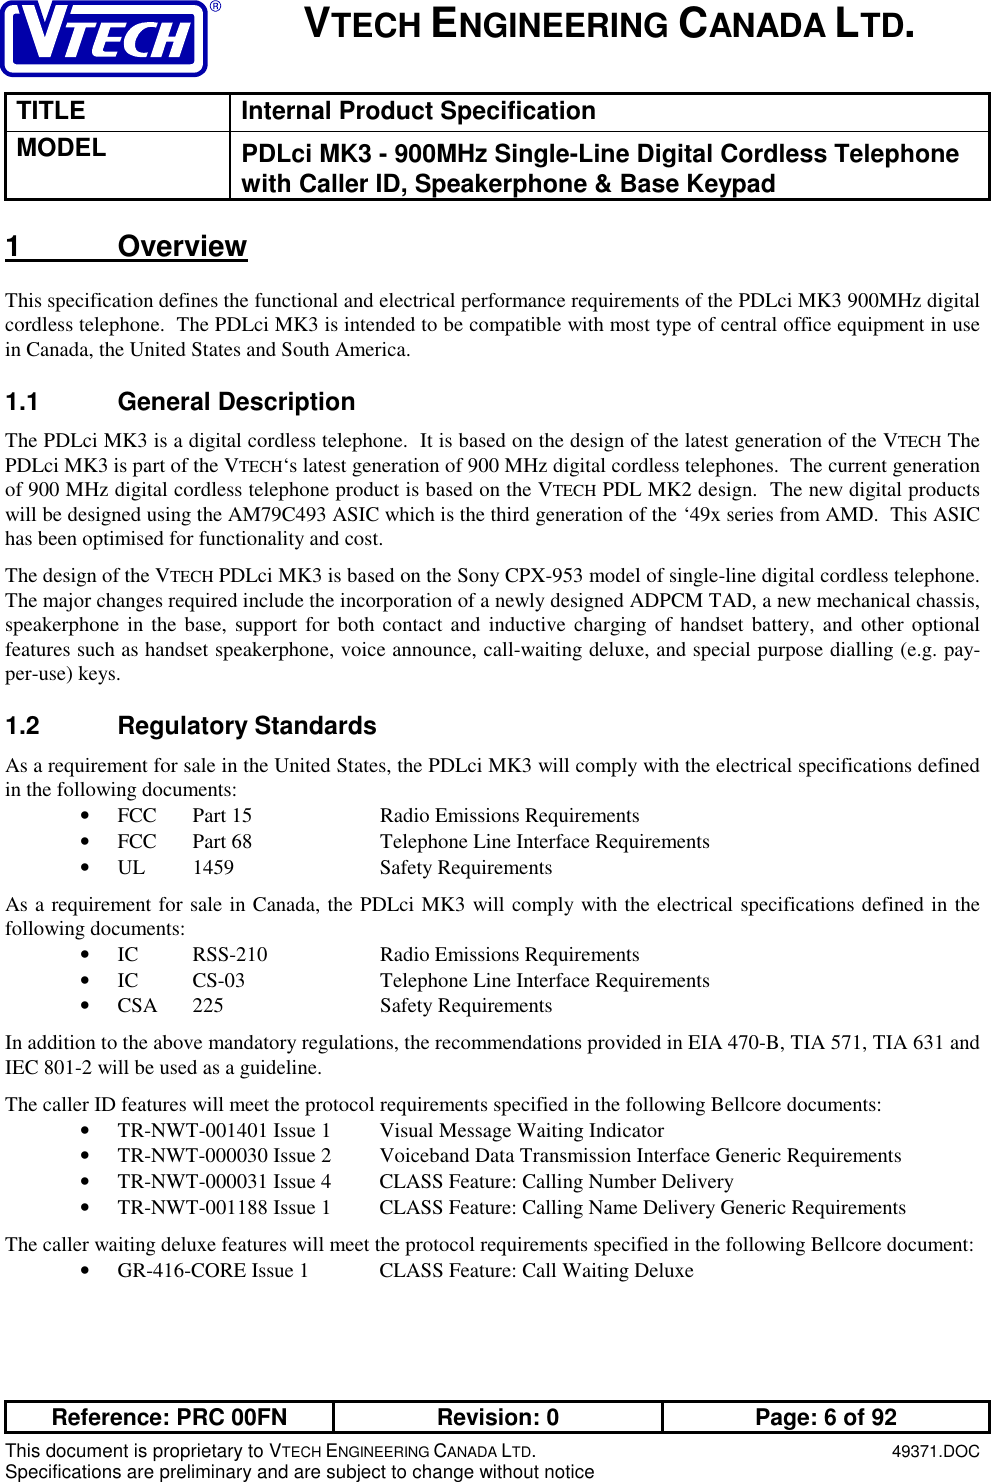 VTECH ENGINEERING CANADA LTD.TITLE Internal Product SpecificationMODEL PDLci MK3 - 900MHz Single-Line Digital Cordless Telephonewith Caller ID, Speakerphone &amp; Base KeypadReference: PRC 00FN Revision: 0 Page: 6 of 92This document is proprietary to VTECH ENGINEERING CANADA LTD.49371.DOCSpecifications are preliminary and are subject to change without notice1 OverviewThis specification defines the functional and electrical performance requirements of the PDLci MK3 900MHz digitalcordless telephone.  The PDLci MK3 is intended to be compatible with most type of central office equipment in usein Canada, the United States and South America.1.1 General DescriptionThe PDLci MK3 is a digital cordless telephone.  It is based on the design of the latest generation of the VTECH ThePDLci MK3 is part of the VTECH‘s latest generation of 900 MHz digital cordless telephones.  The current generationof 900 MHz digital cordless telephone product is based on the VTECH PDL MK2 design.  The new digital productswill be designed using the AM79C493 ASIC which is the third generation of the ‘49x series from AMD.  This ASIChas been optimised for functionality and cost.The design of the VTECH PDLci MK3 is based on the Sony CPX-953 model of single-line digital cordless telephone.The major changes required include the incorporation of a newly designed ADPCM TAD, a new mechanical chassis,speakerphone in the base, support for both contact and inductive charging of handset battery, and other optionalfeatures such as handset speakerphone, voice announce, call-waiting deluxe, and special purpose dialling (e.g. pay-per-use) keys.1.2 Regulatory StandardsAs a requirement for sale in the United States, the PDLci MK3 will comply with the electrical specifications definedin the following documents:• FCC Part 15 Radio Emissions Requirements• FCC Part 68 Telephone Line Interface Requirements• UL 1459 Safety RequirementsAs a requirement for sale in Canada, the PDLci MK3 will comply with the electrical specifications defined in thefollowing documents:• IC RSS-210 Radio Emissions Requirements• IC CS-03 Telephone Line Interface Requirements• CSA 225 Safety RequirementsIn addition to the above mandatory regulations, the recommendations provided in EIA 470-B, TIA 571, TIA 631 andIEC 801-2 will be used as a guideline.The caller ID features will meet the protocol requirements specified in the following Bellcore documents:• TR-NWT-001401 Issue 1 Visual Message Waiting Indicator• TR-NWT-000030 Issue 2 Voiceband Data Transmission Interface Generic Requirements• TR-NWT-000031 Issue 4 CLASS Feature: Calling Number Delivery• TR-NWT-001188 Issue 1 CLASS Feature: Calling Name Delivery Generic RequirementsThe caller waiting deluxe features will meet the protocol requirements specified in the following Bellcore document:• GR-416-CORE Issue 1 CLASS Feature: Call Waiting Deluxe